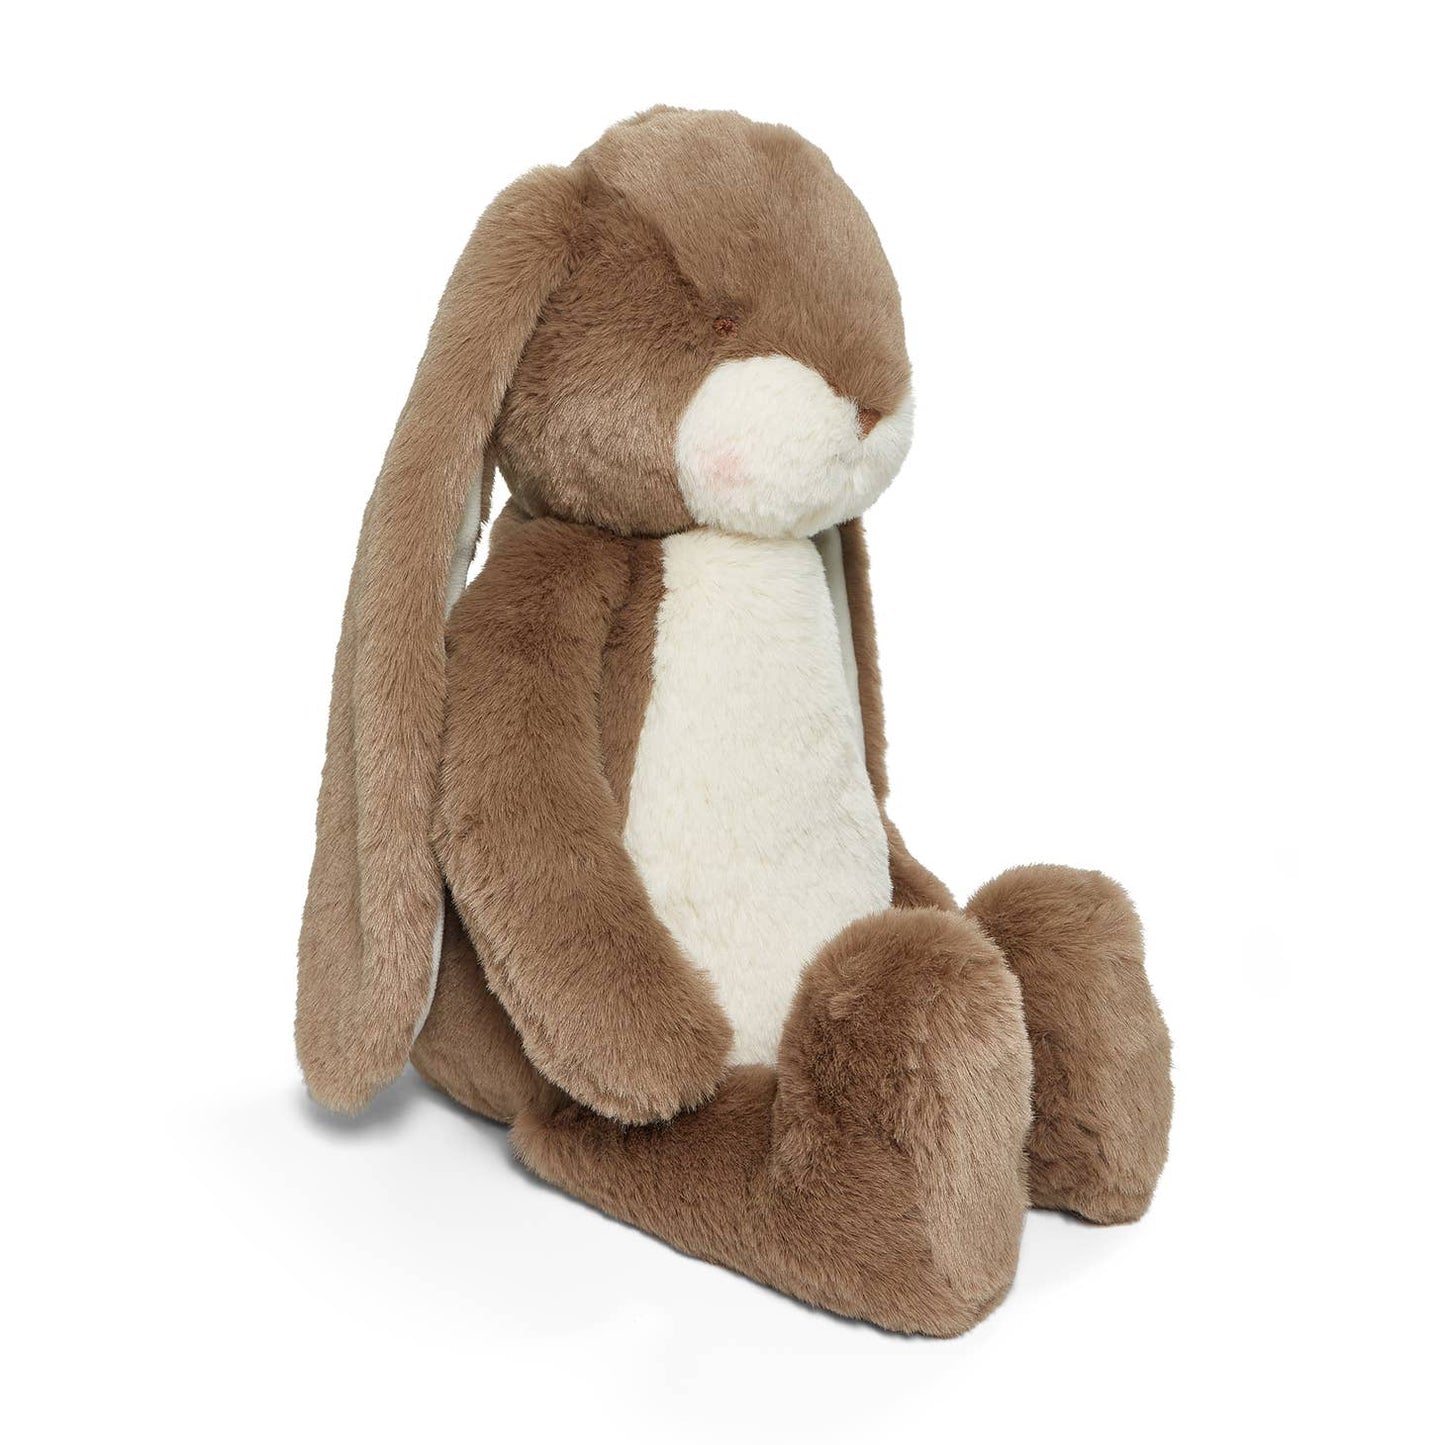 Floppy Nibble Bunny 16'' - Ginger Snap